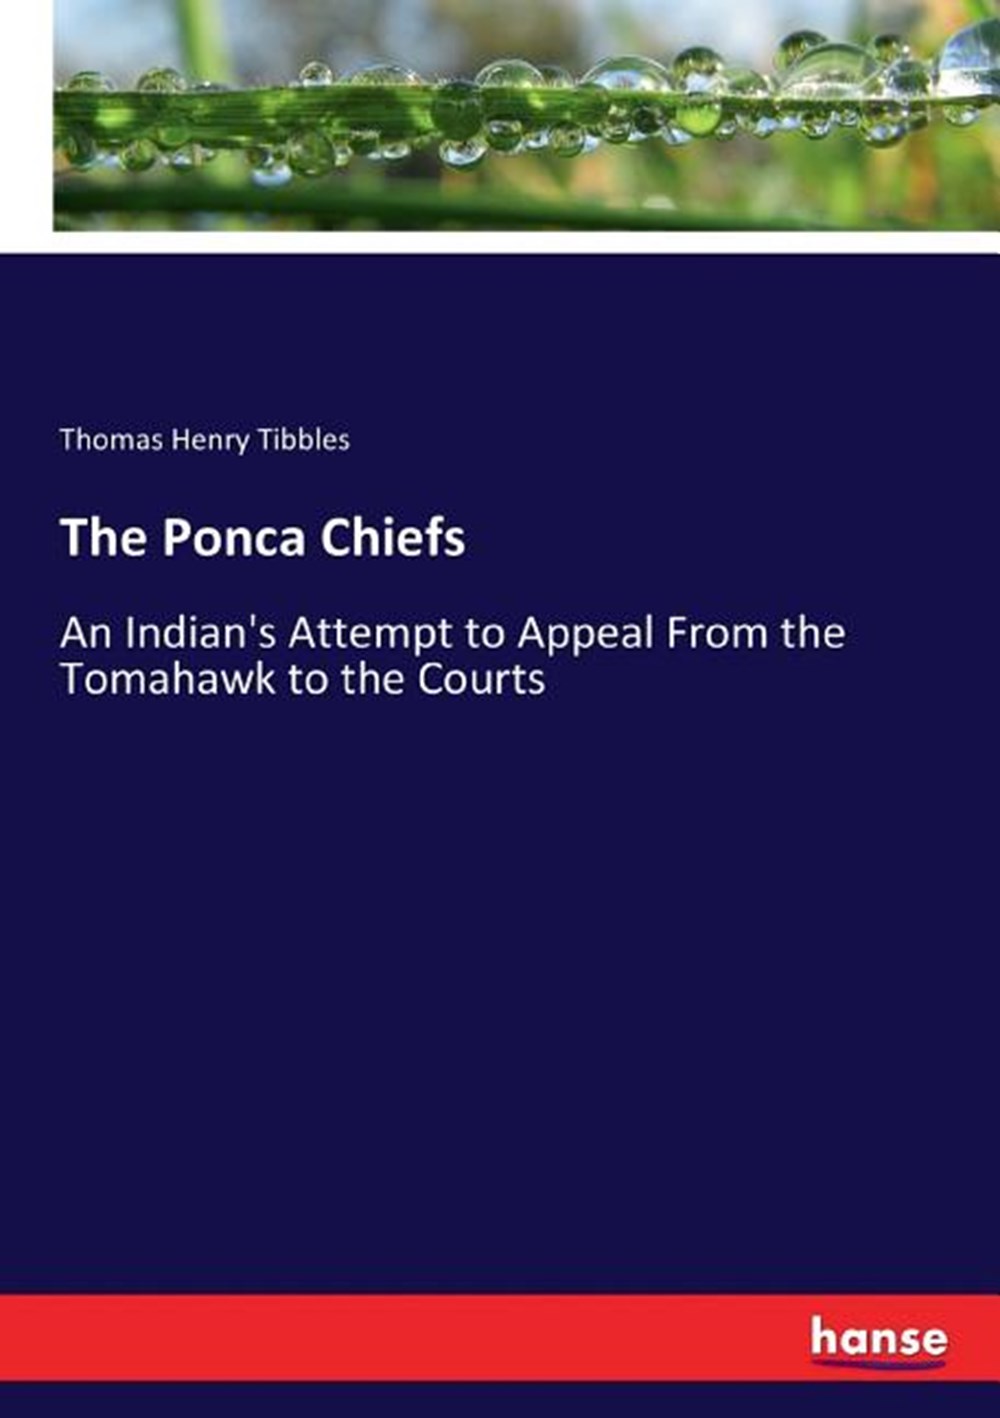 Ponca Chiefs: An Indian's Attempt to Appeal From the Tomahawk to the Courts